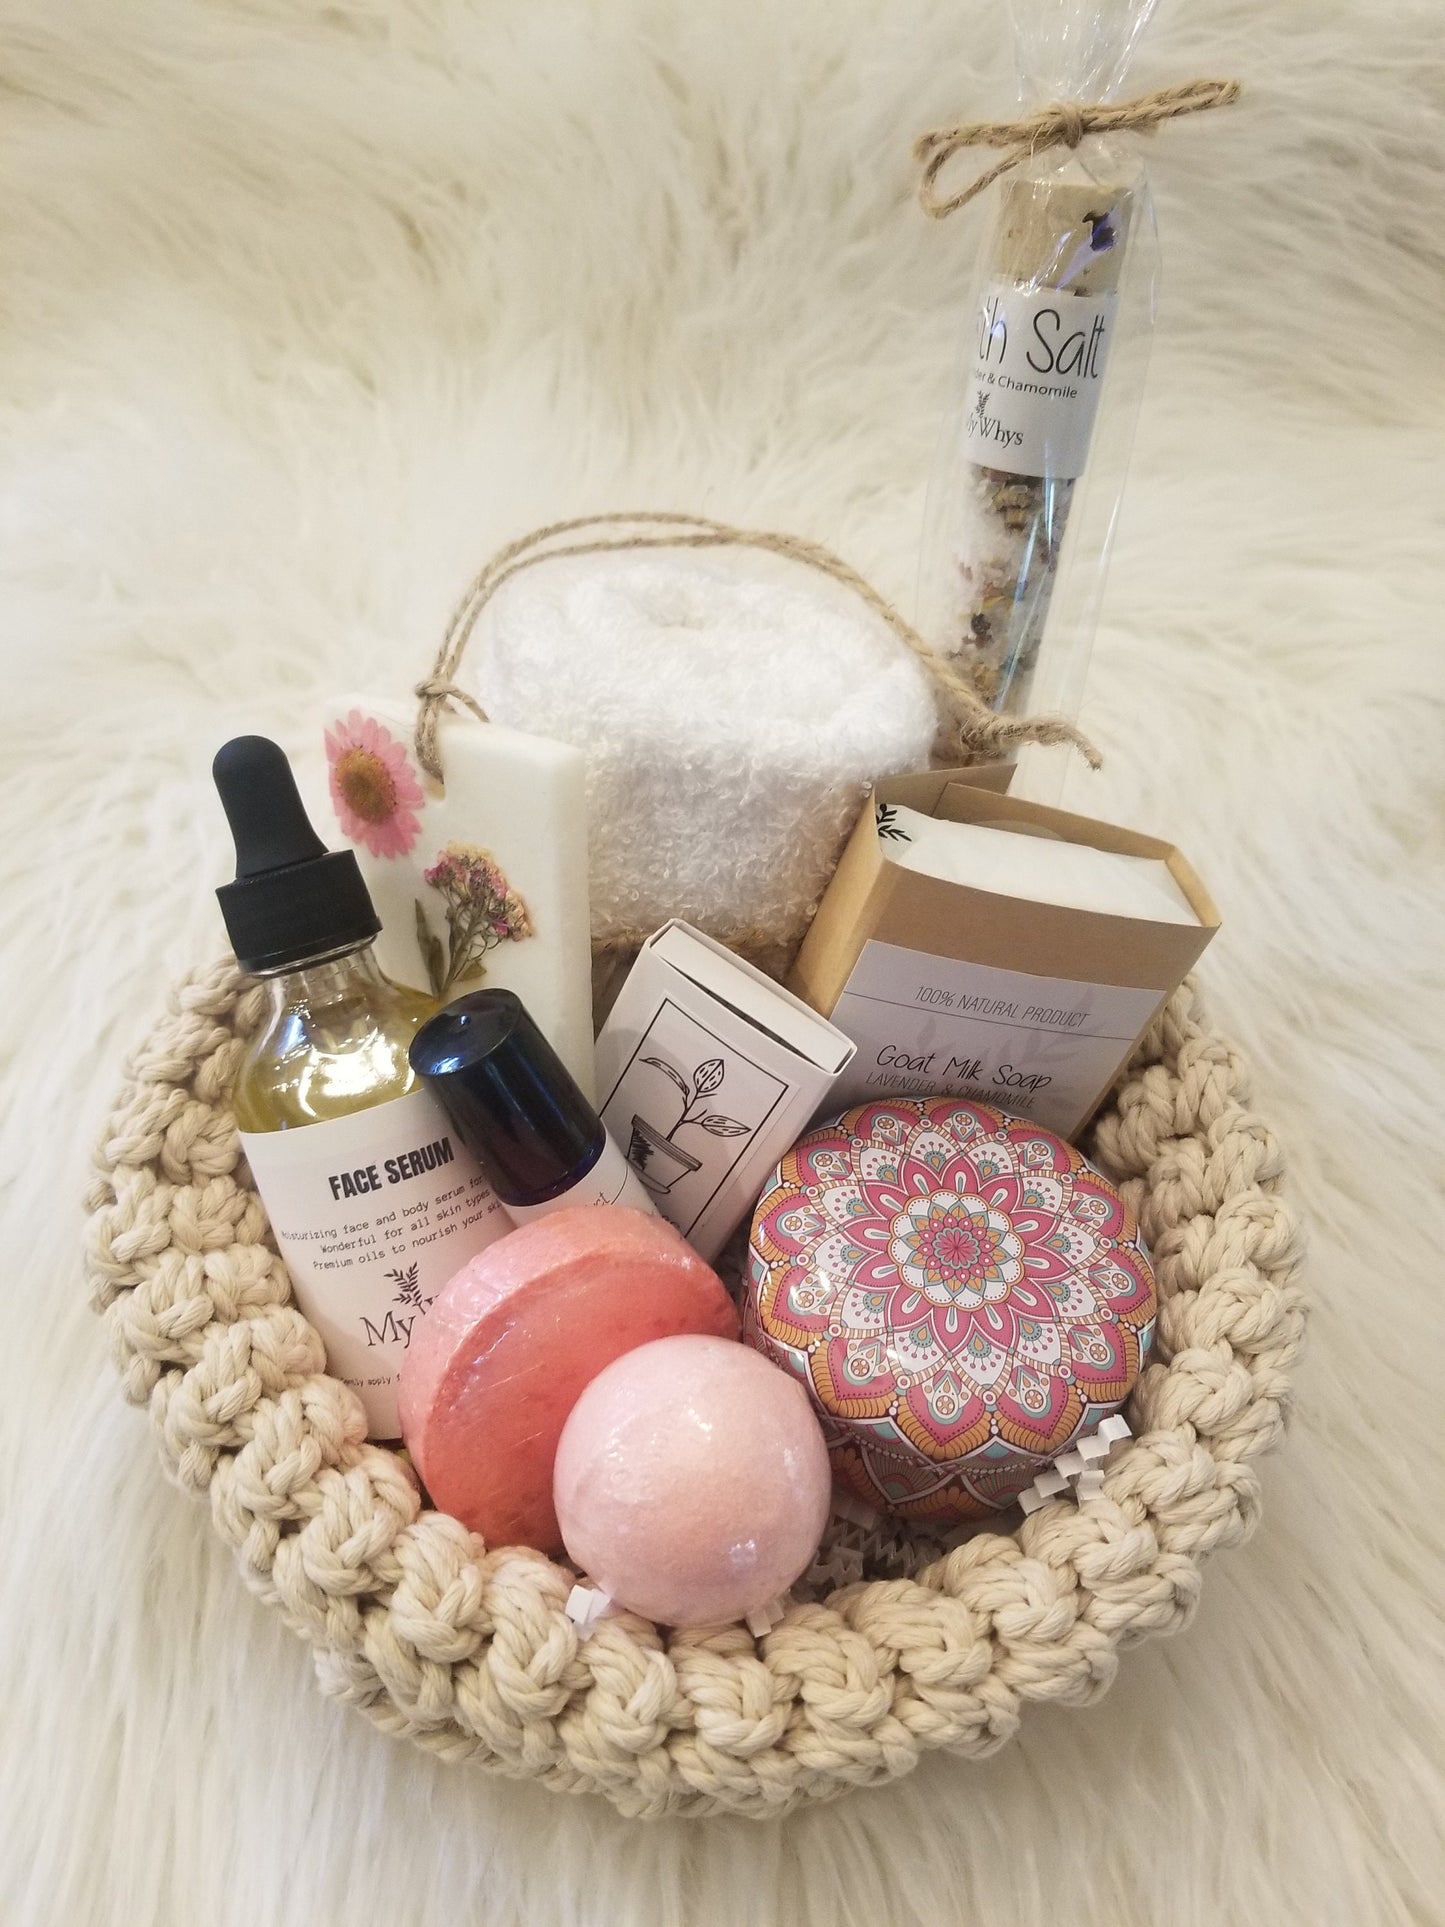 Mother's day gift set, Spa gift basket for her, mom birthday care package, relaxation gift basket for mom, Make yourself a priority spa set